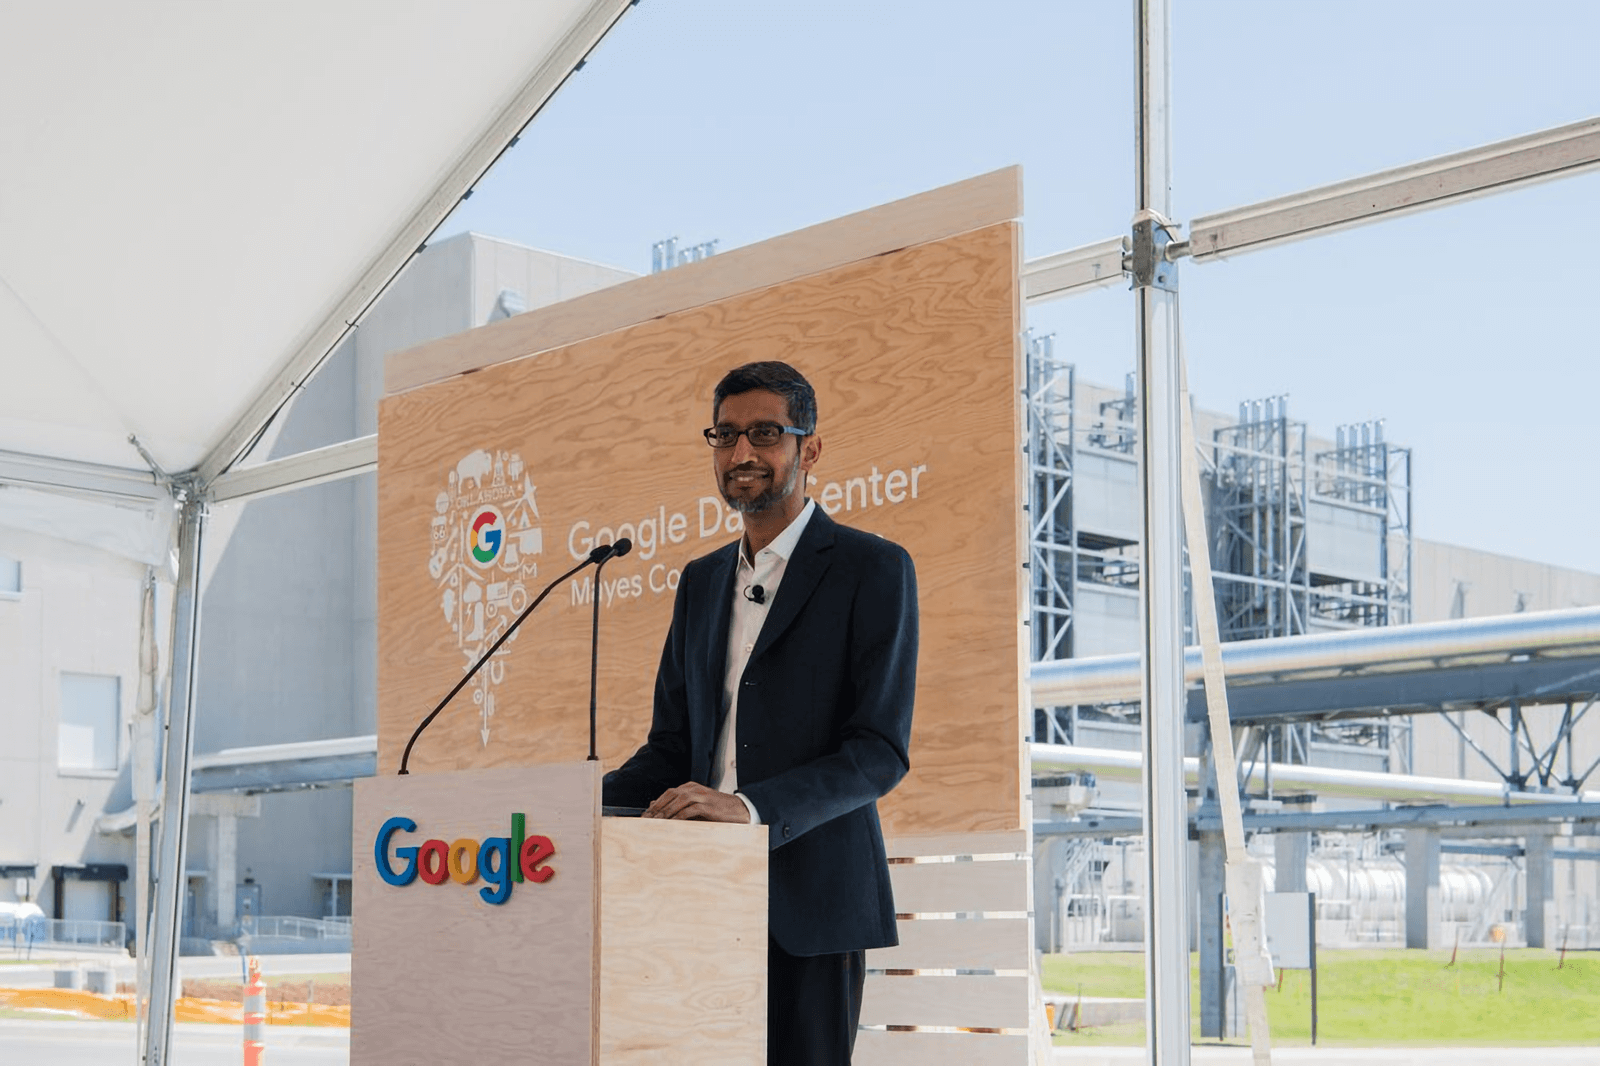 Google will invest over $10 billion on US offices and data centers in 2020